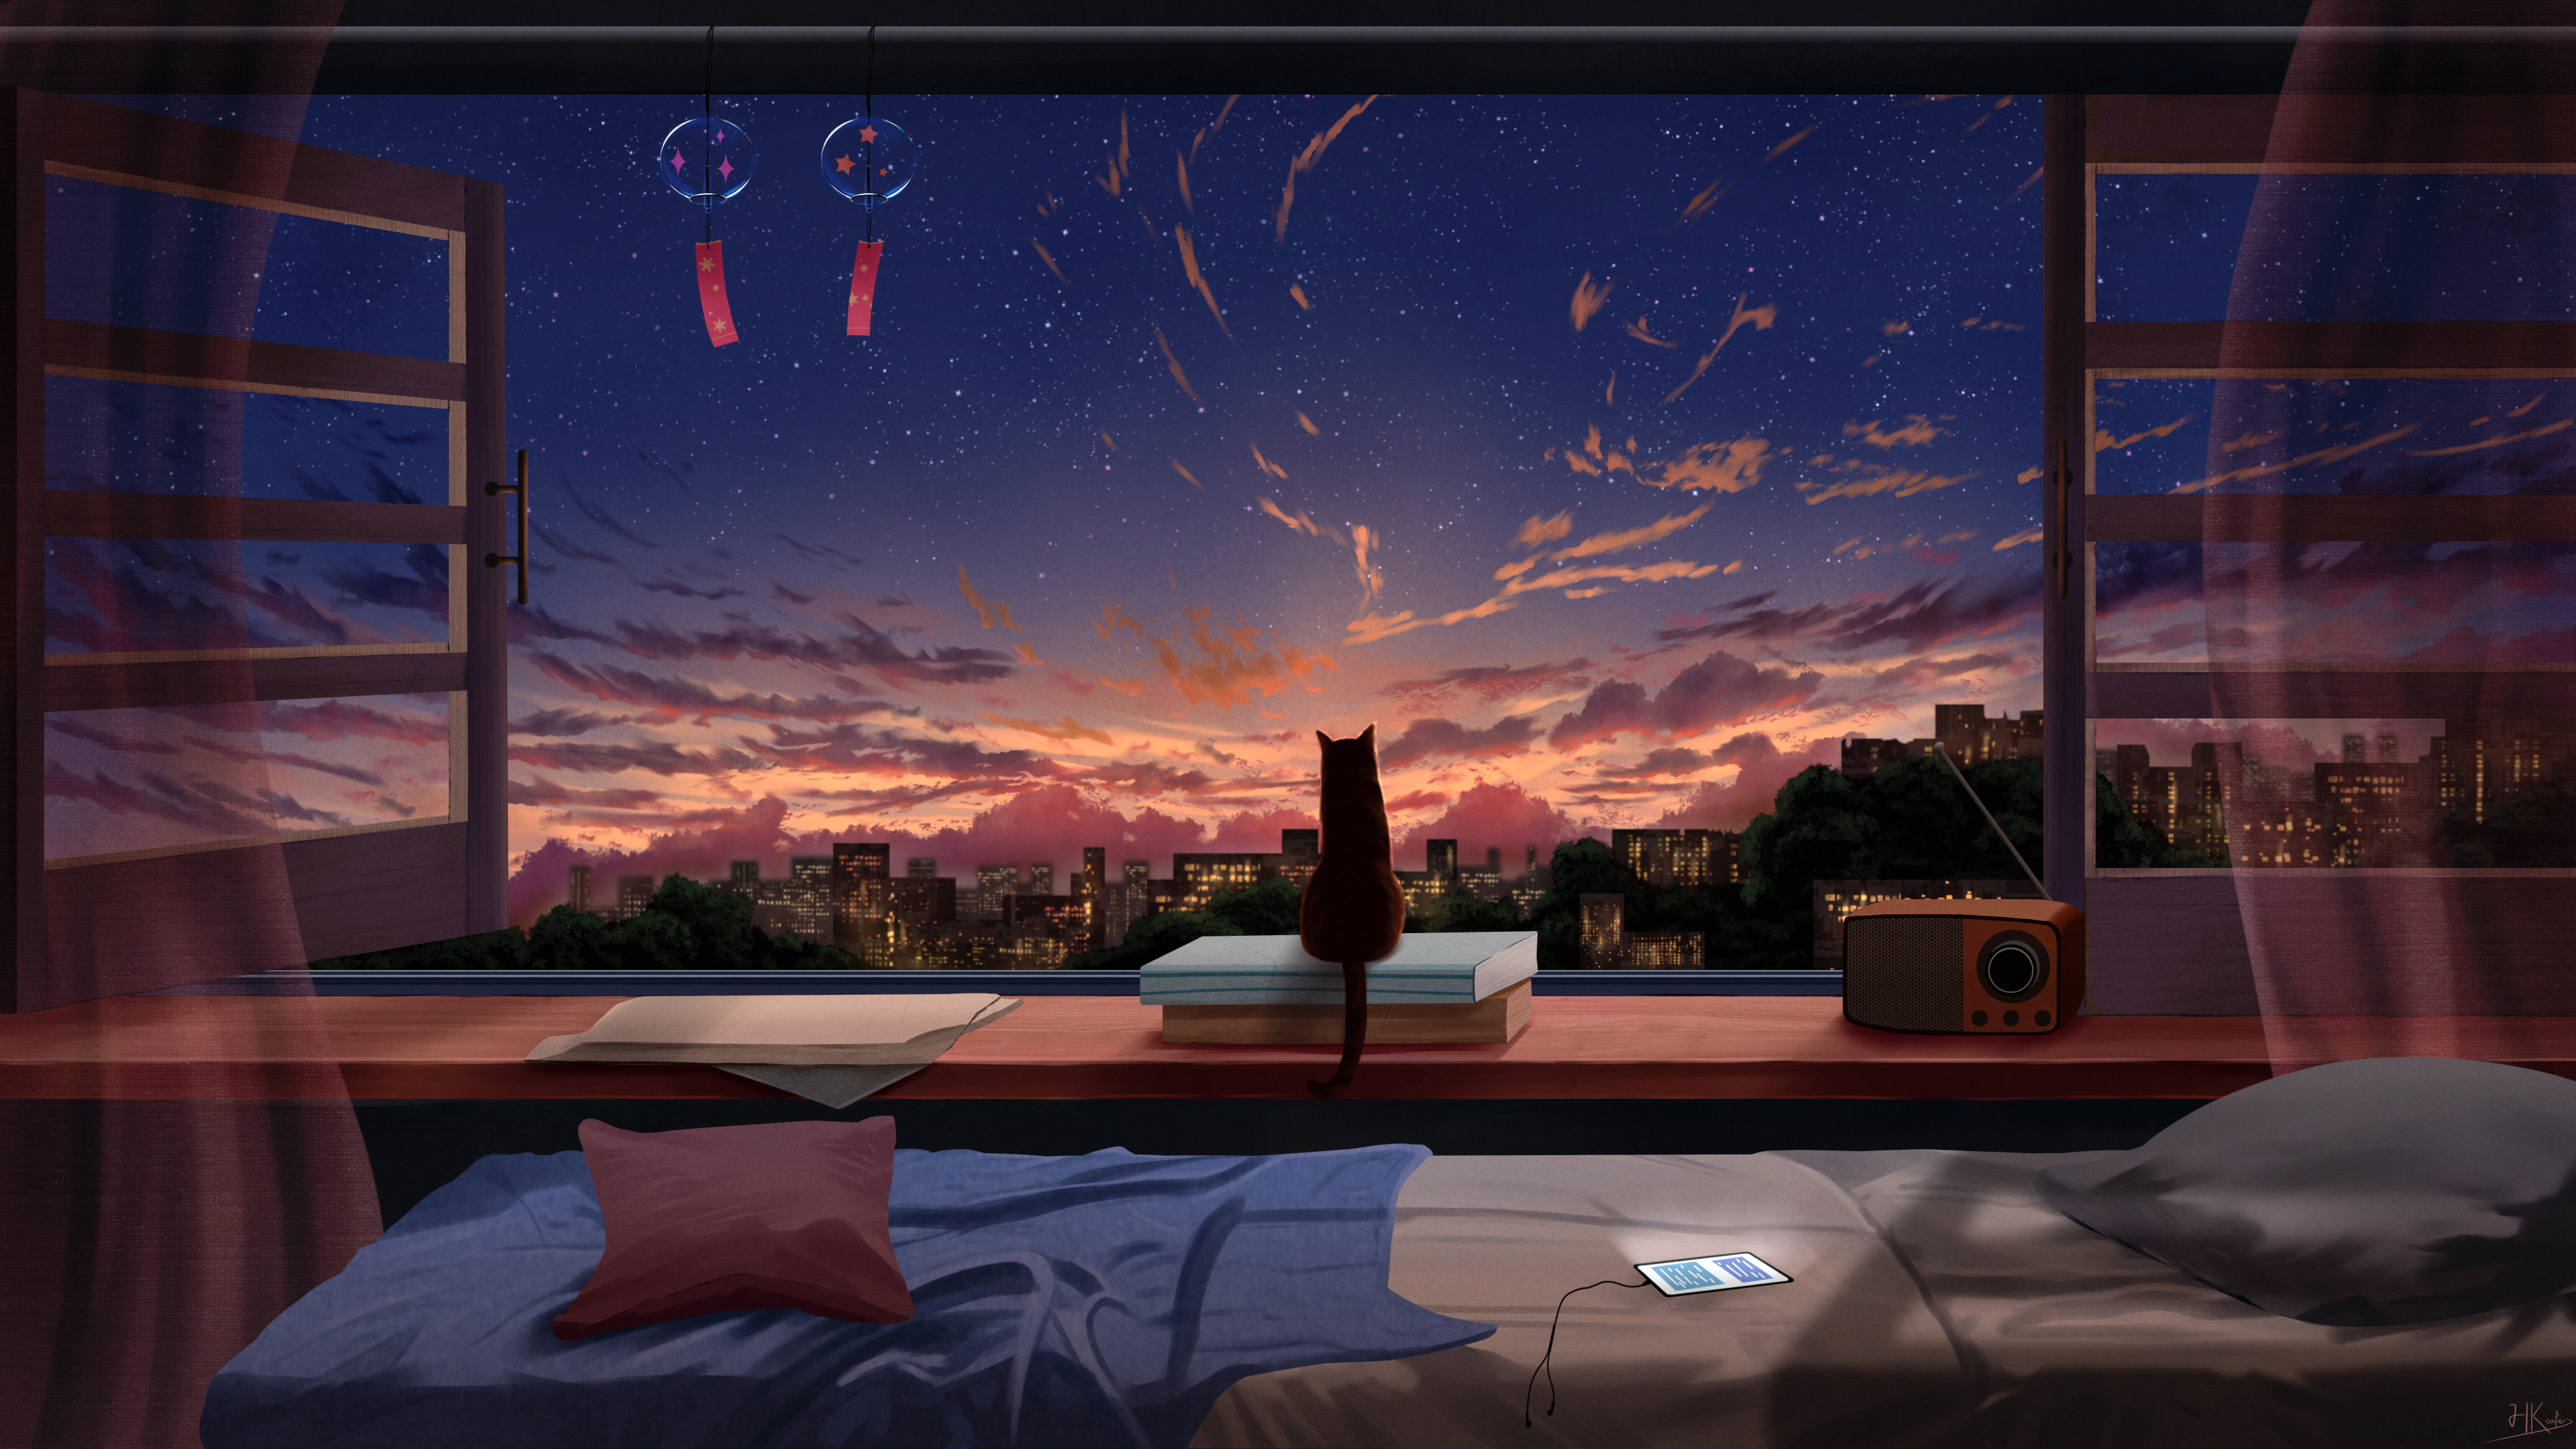 General 3840x2160 digital art artwork illustration sunset sky clouds stars window interior city cityscape bed room wind chimes starred sky signature animals HKcutie cats 4K building phone pillow sunset glow sunlight natural light